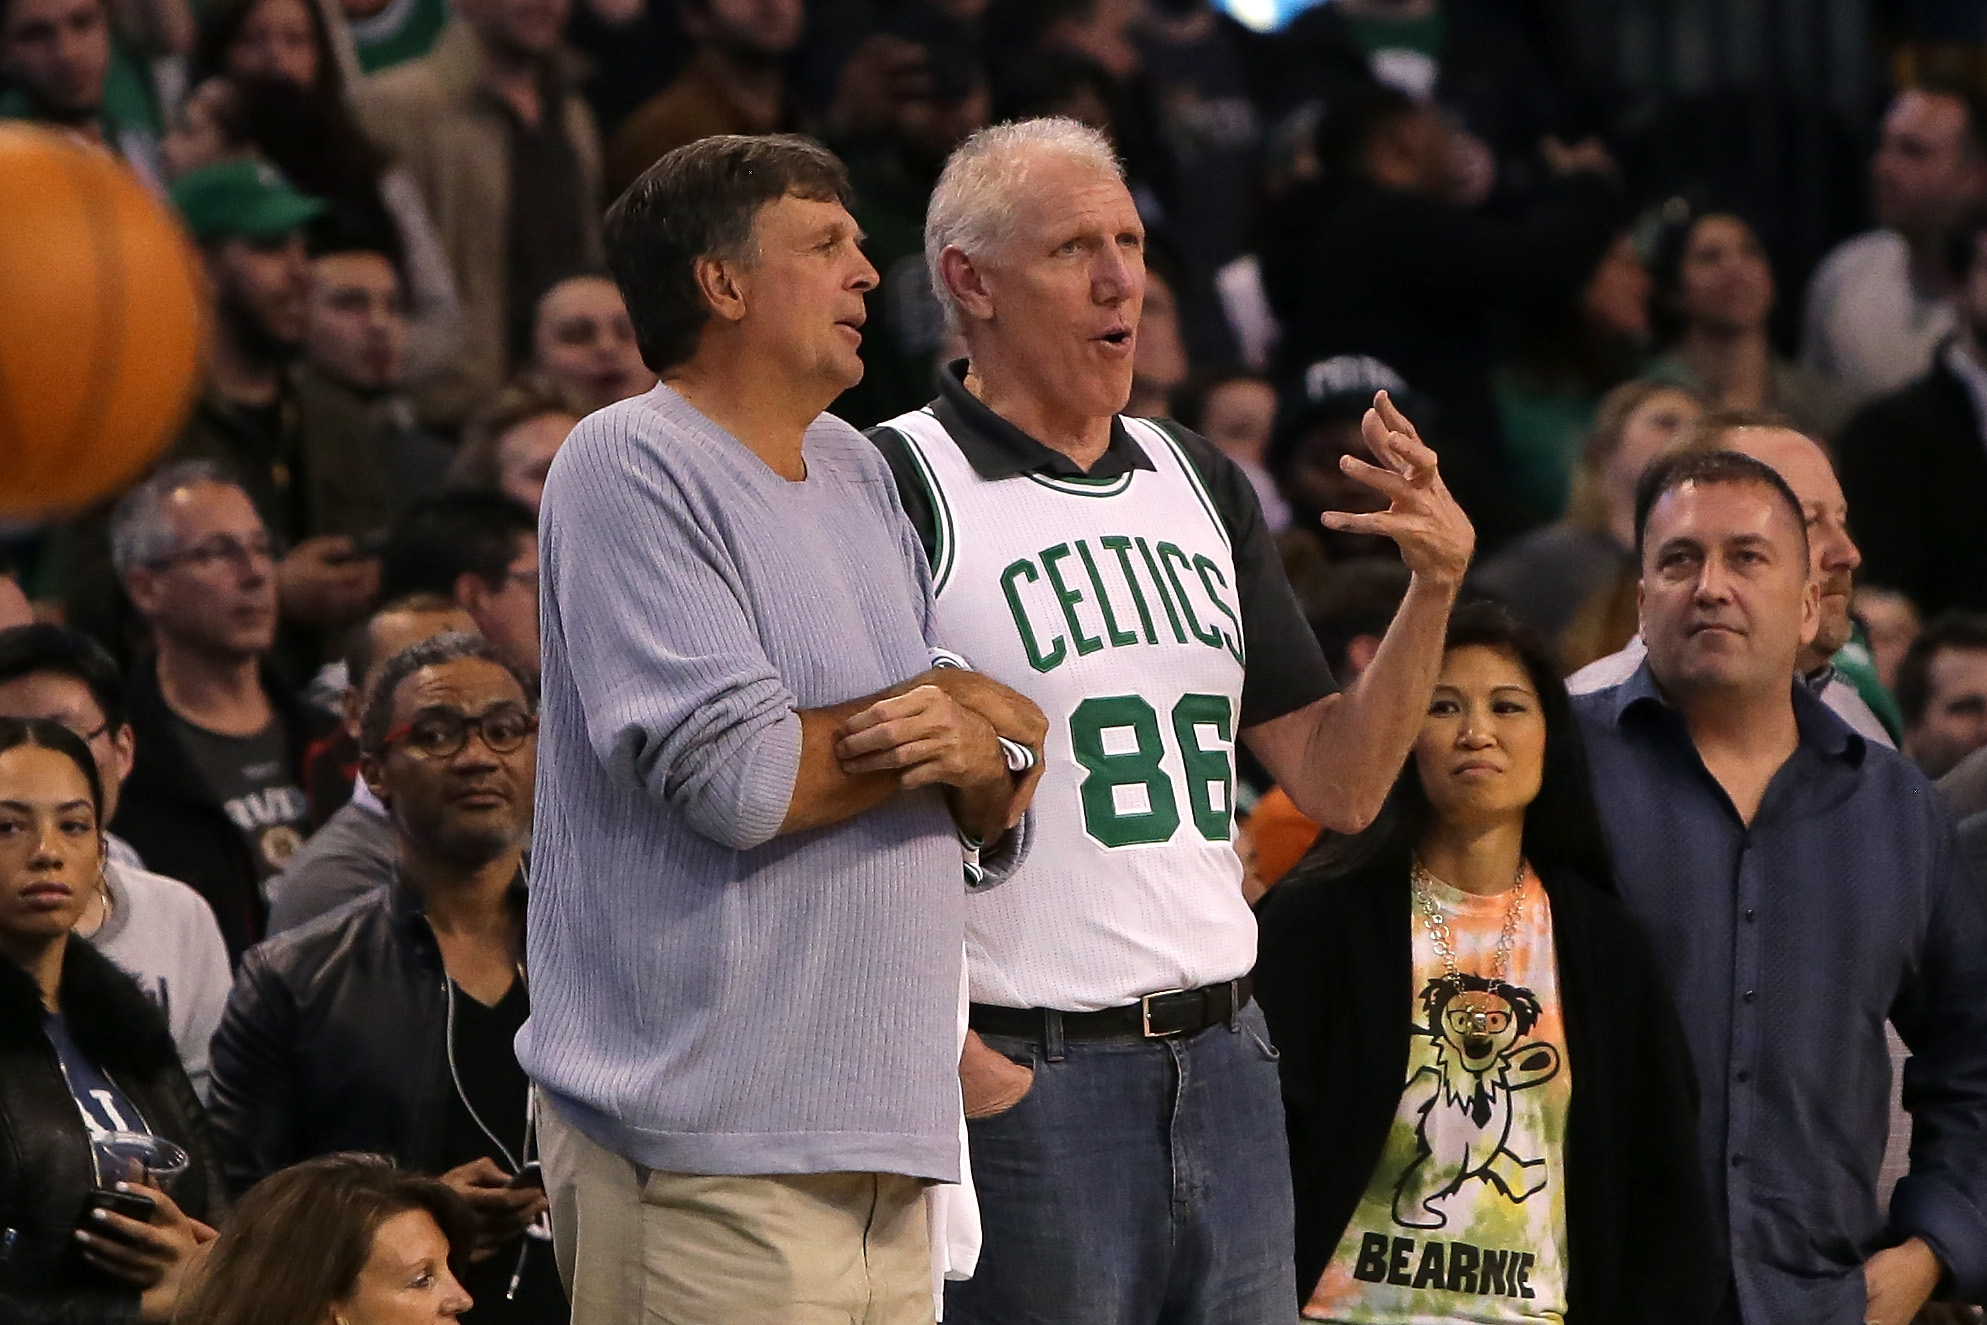 Bill Walton Once Said His Greatest Basketball Moment Involved Kevin McHale at a 1986 Boston Celtics Practice